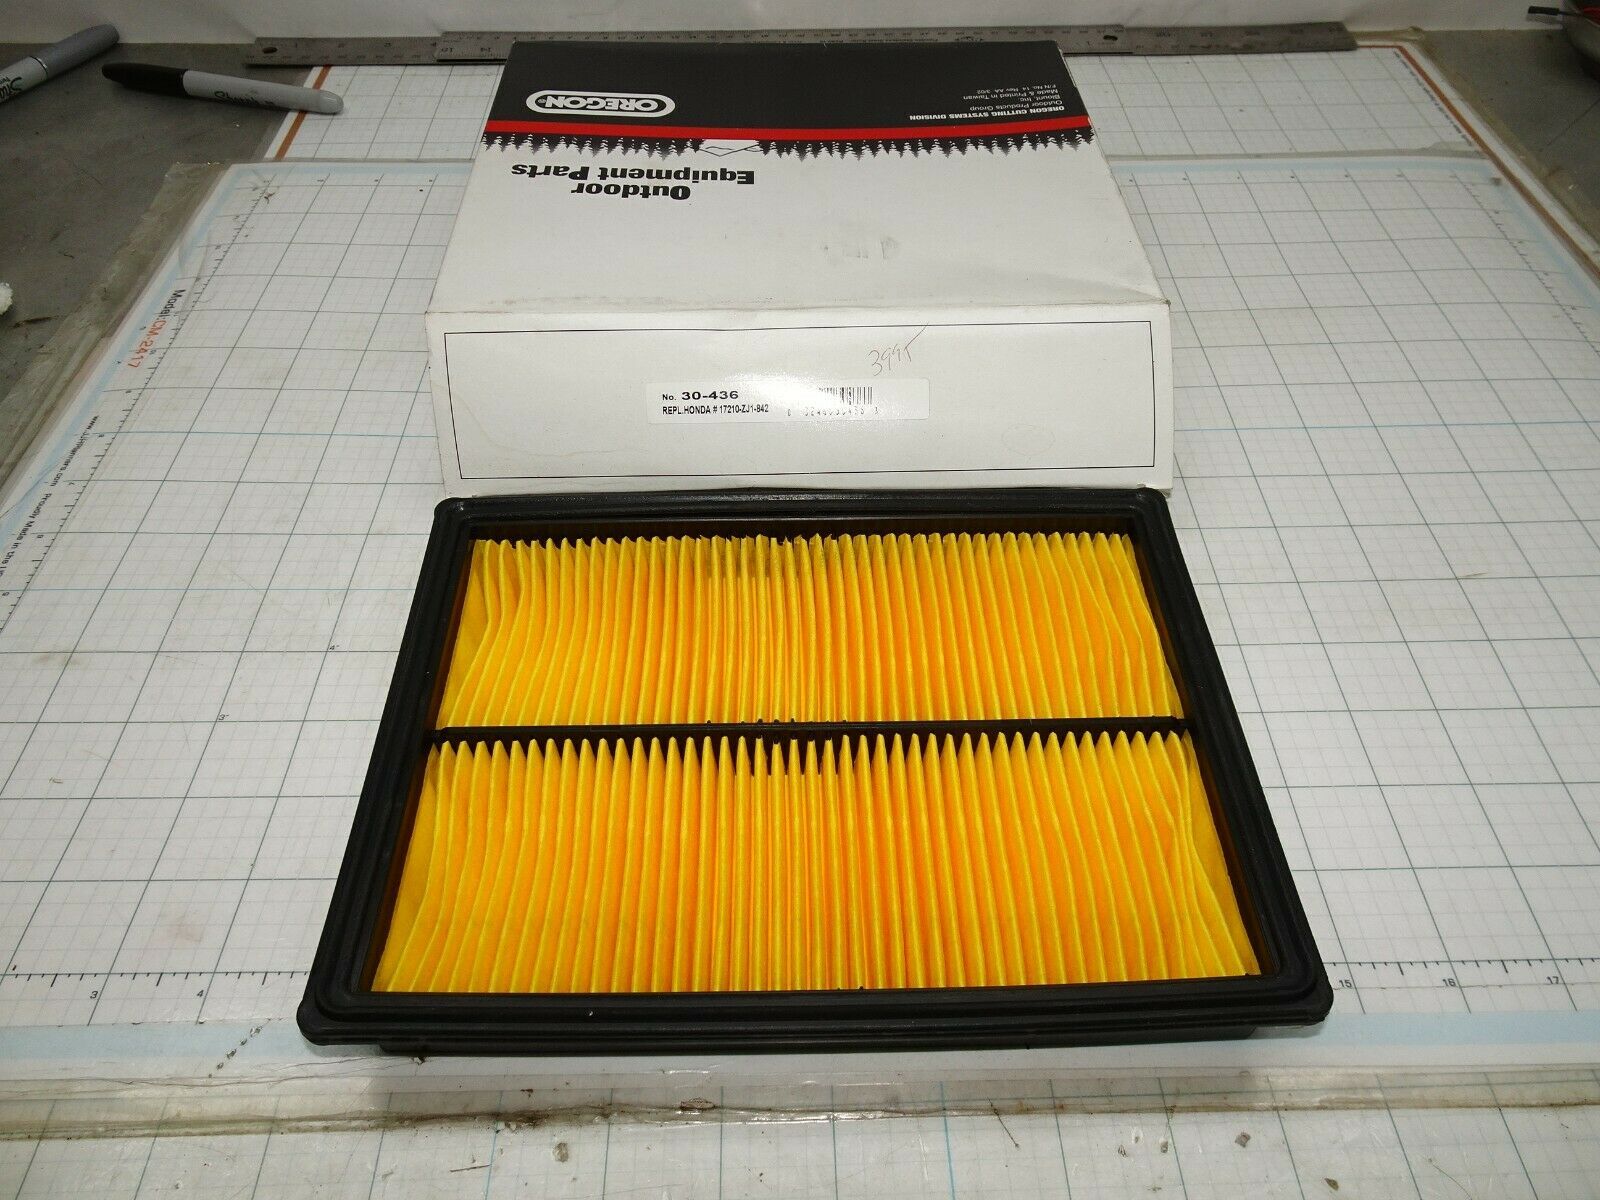 Primary image for Oregon 30-436 Air Filter Element Replaces Honda 17210-ZJ1-842  OEM NOS